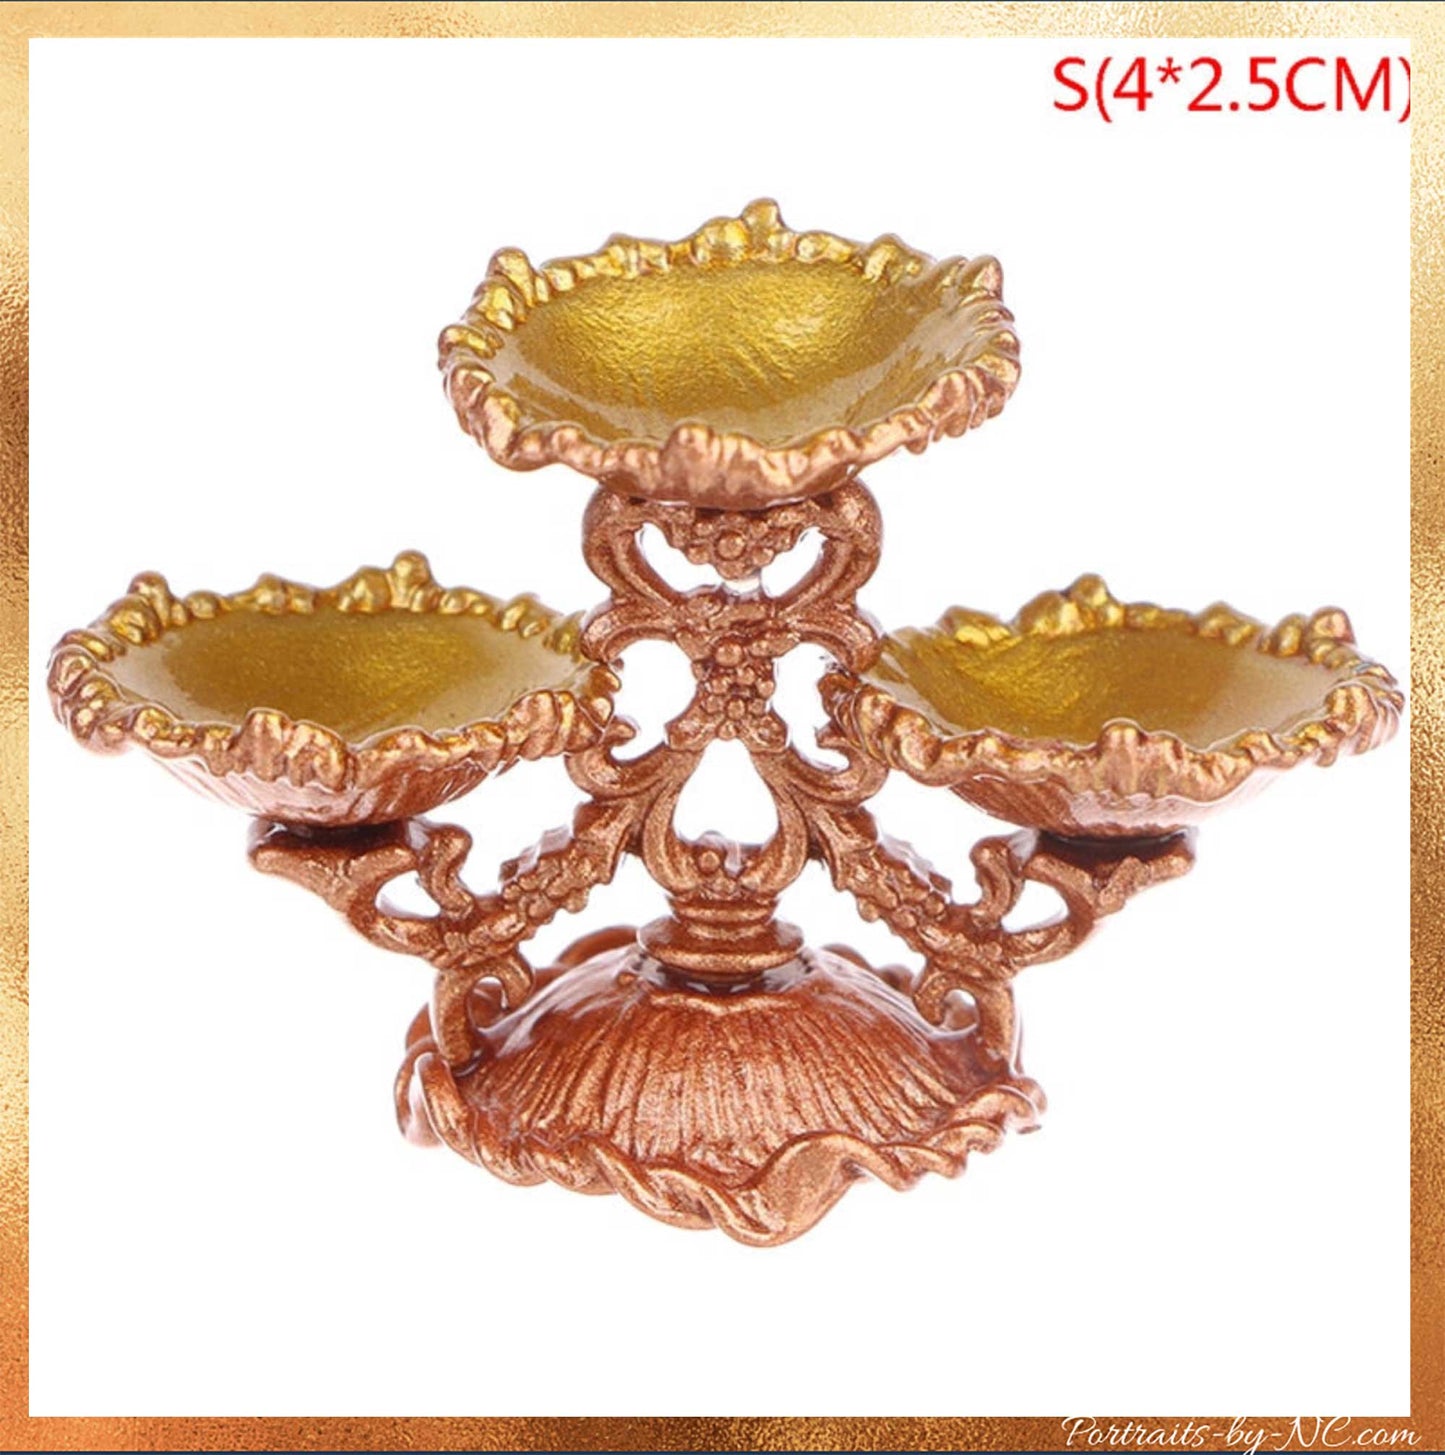 Dessert, Fruit or Cake Stand  - Dollhouse 1/12 scale Accessory